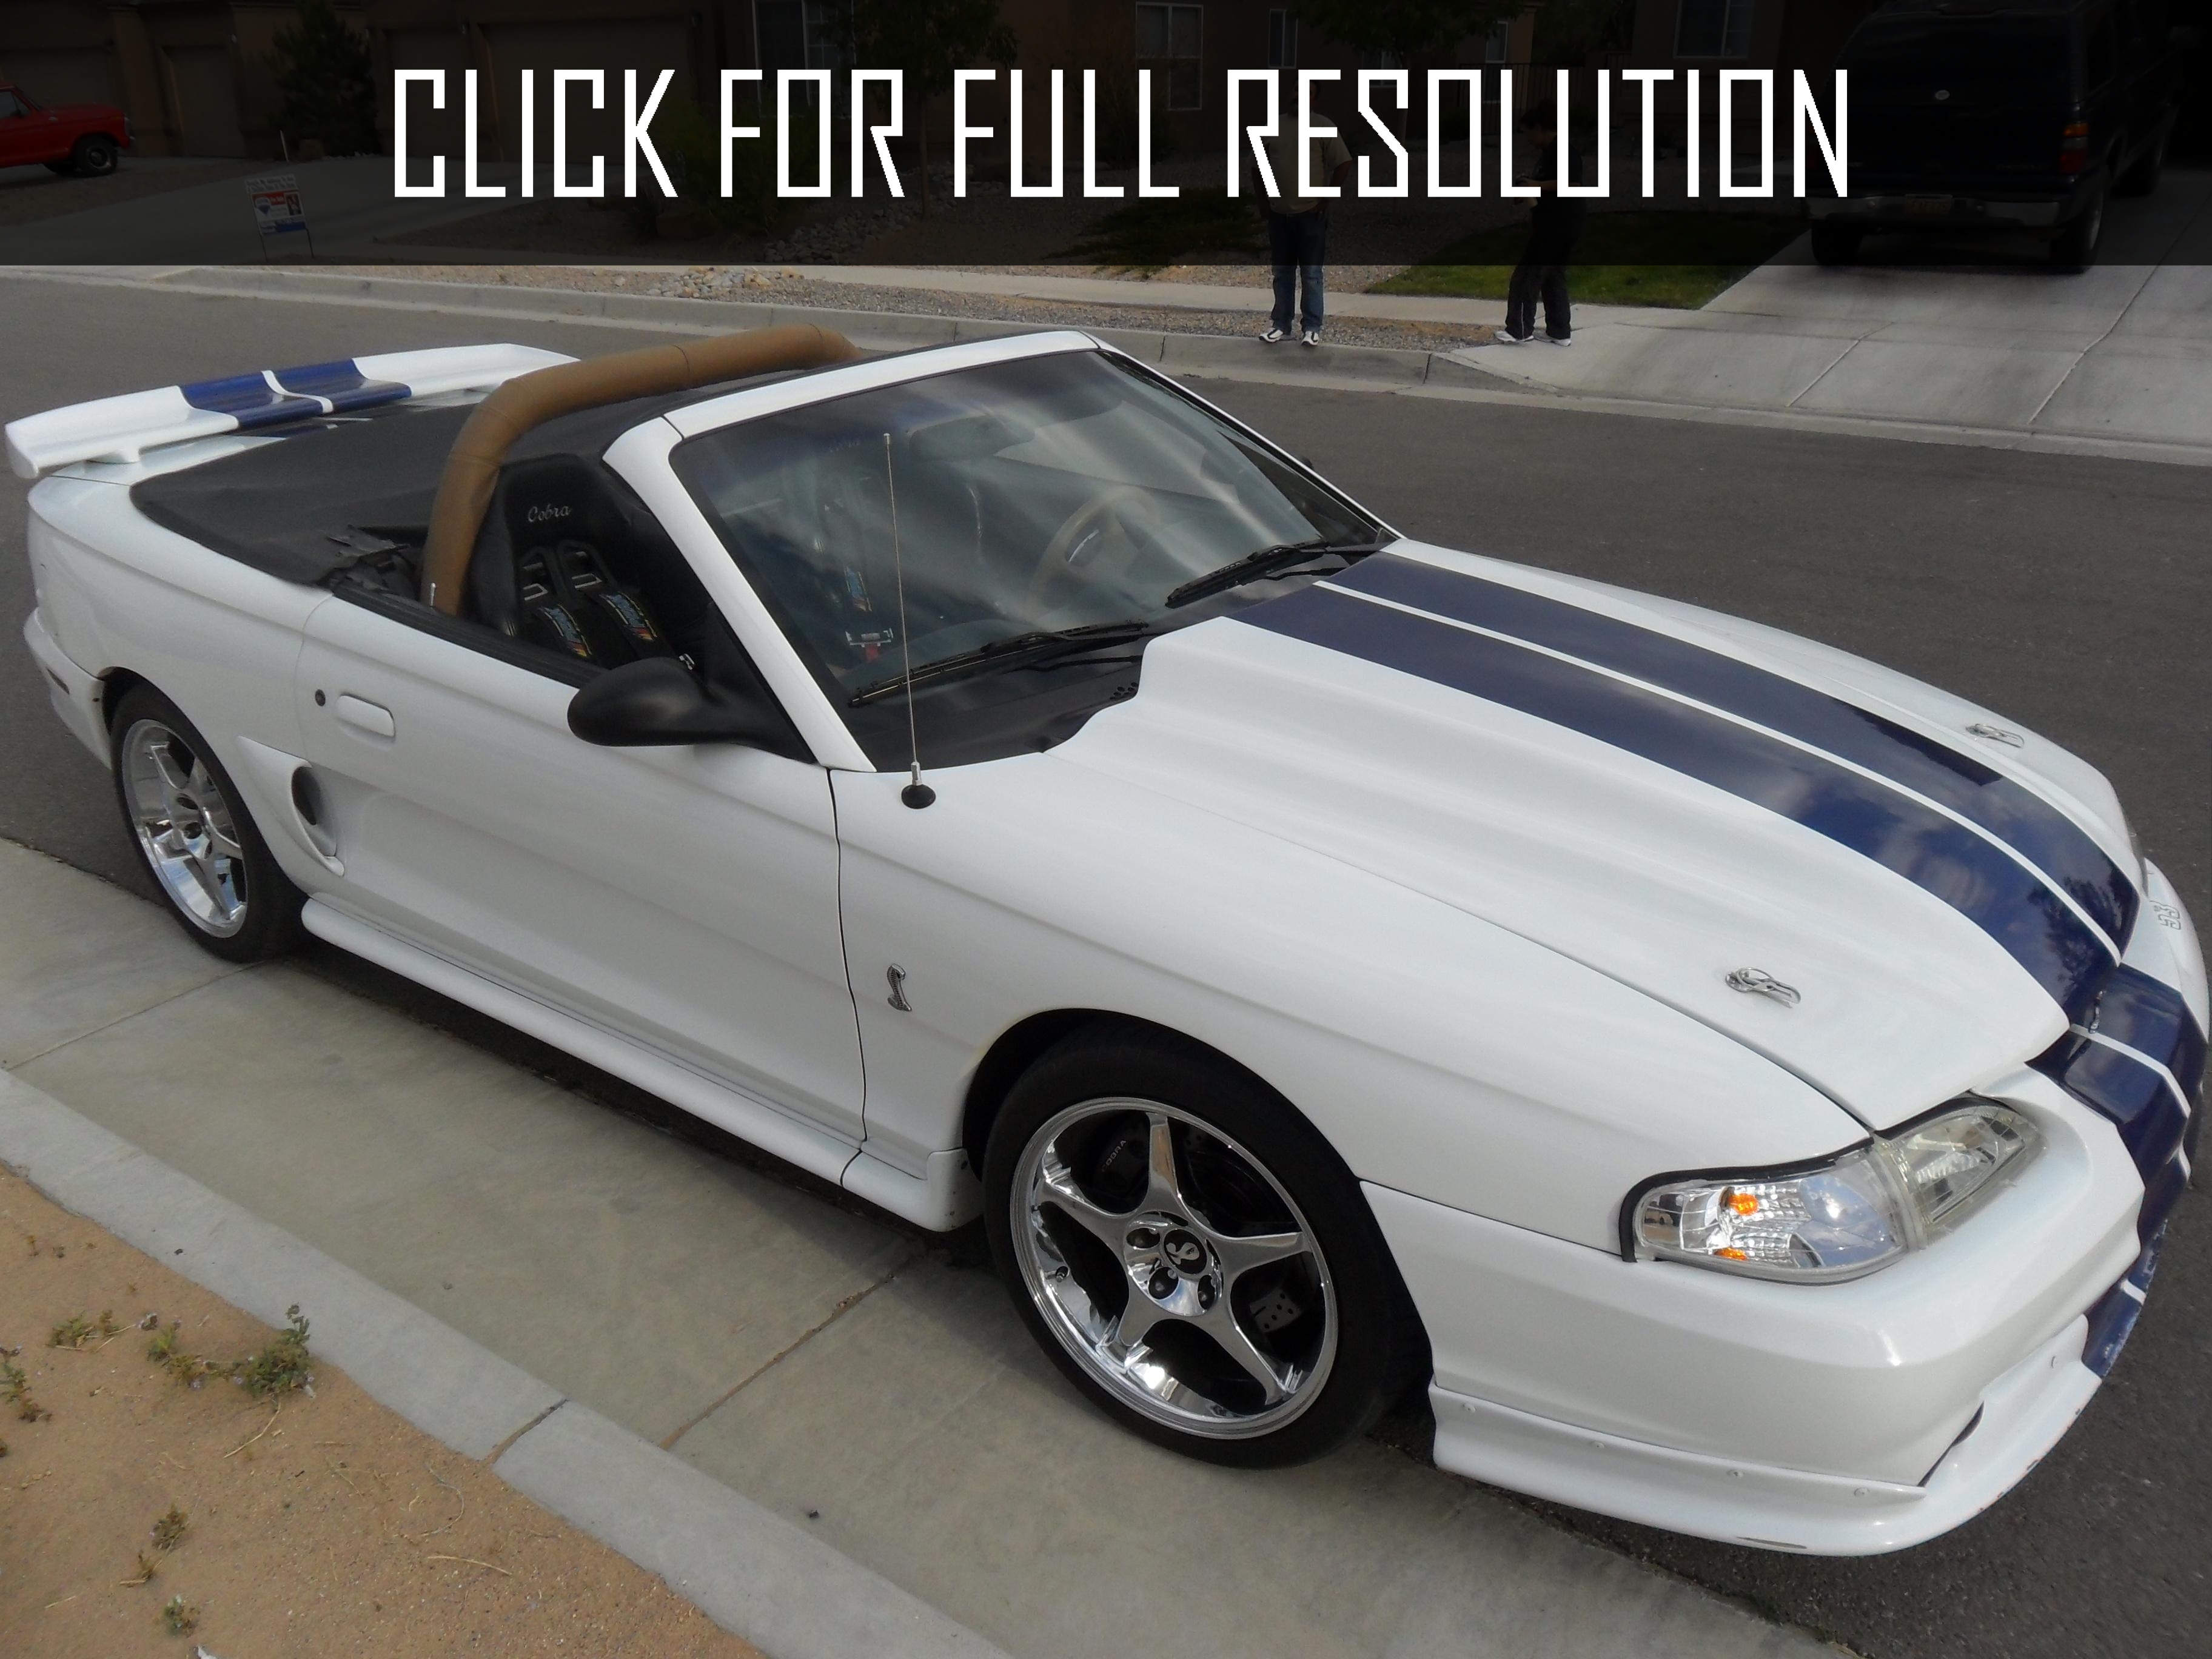 1996 Ford Mustang Convertible